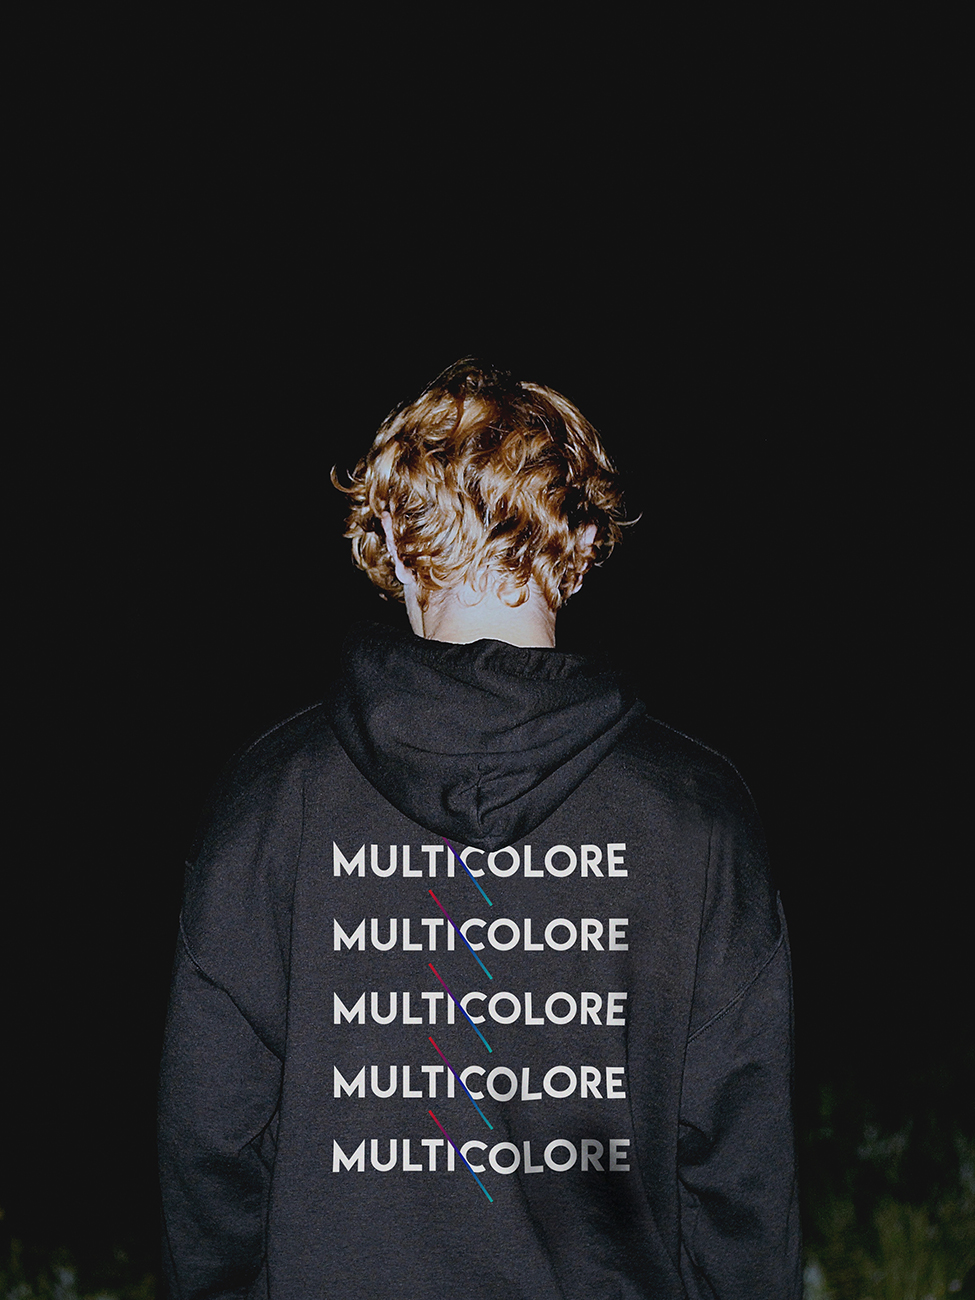 multicolore_branding_by-catherine-bisaillon_975x1300_006